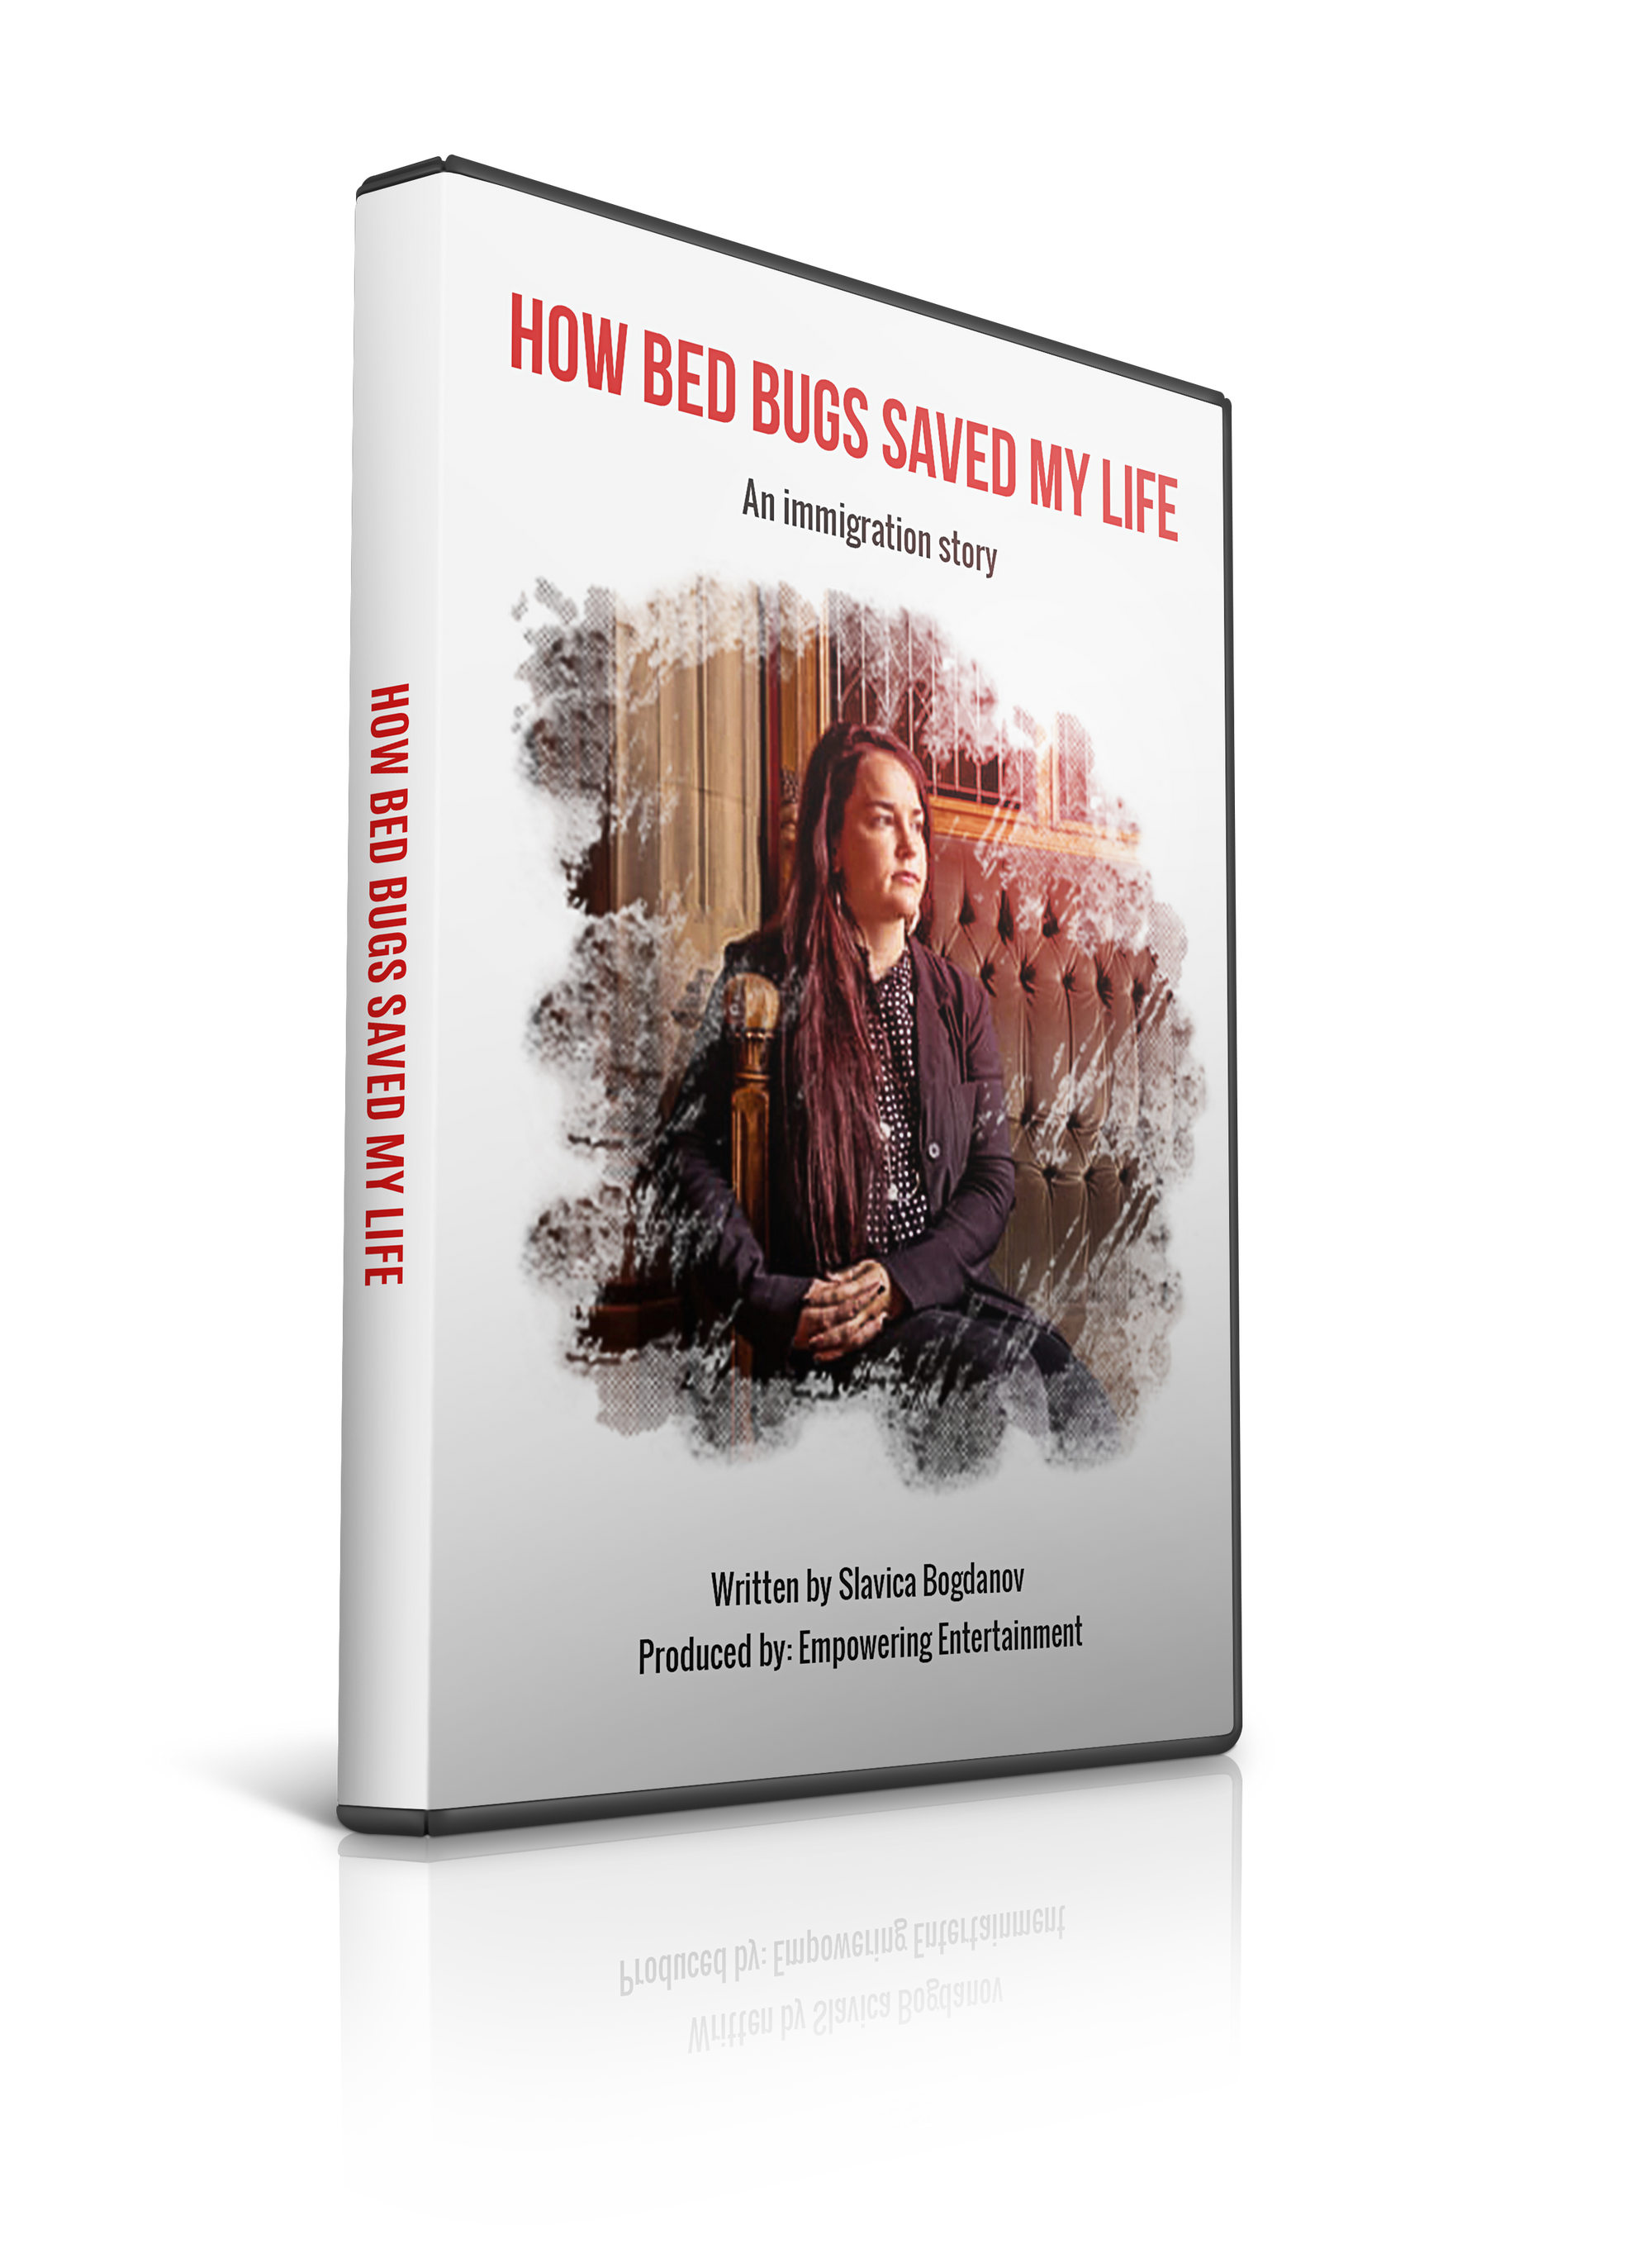 How Bed Bugs Saved My Life